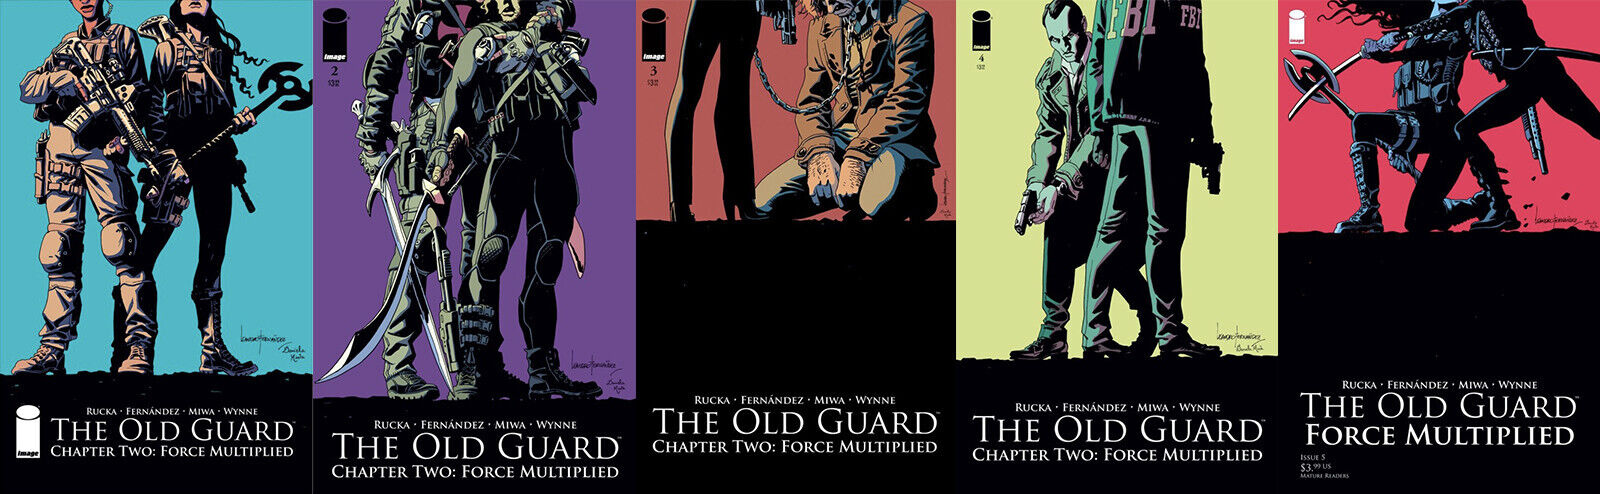 The Old Guard: Force Multiplied Issues #1-5 (2019/20) NM